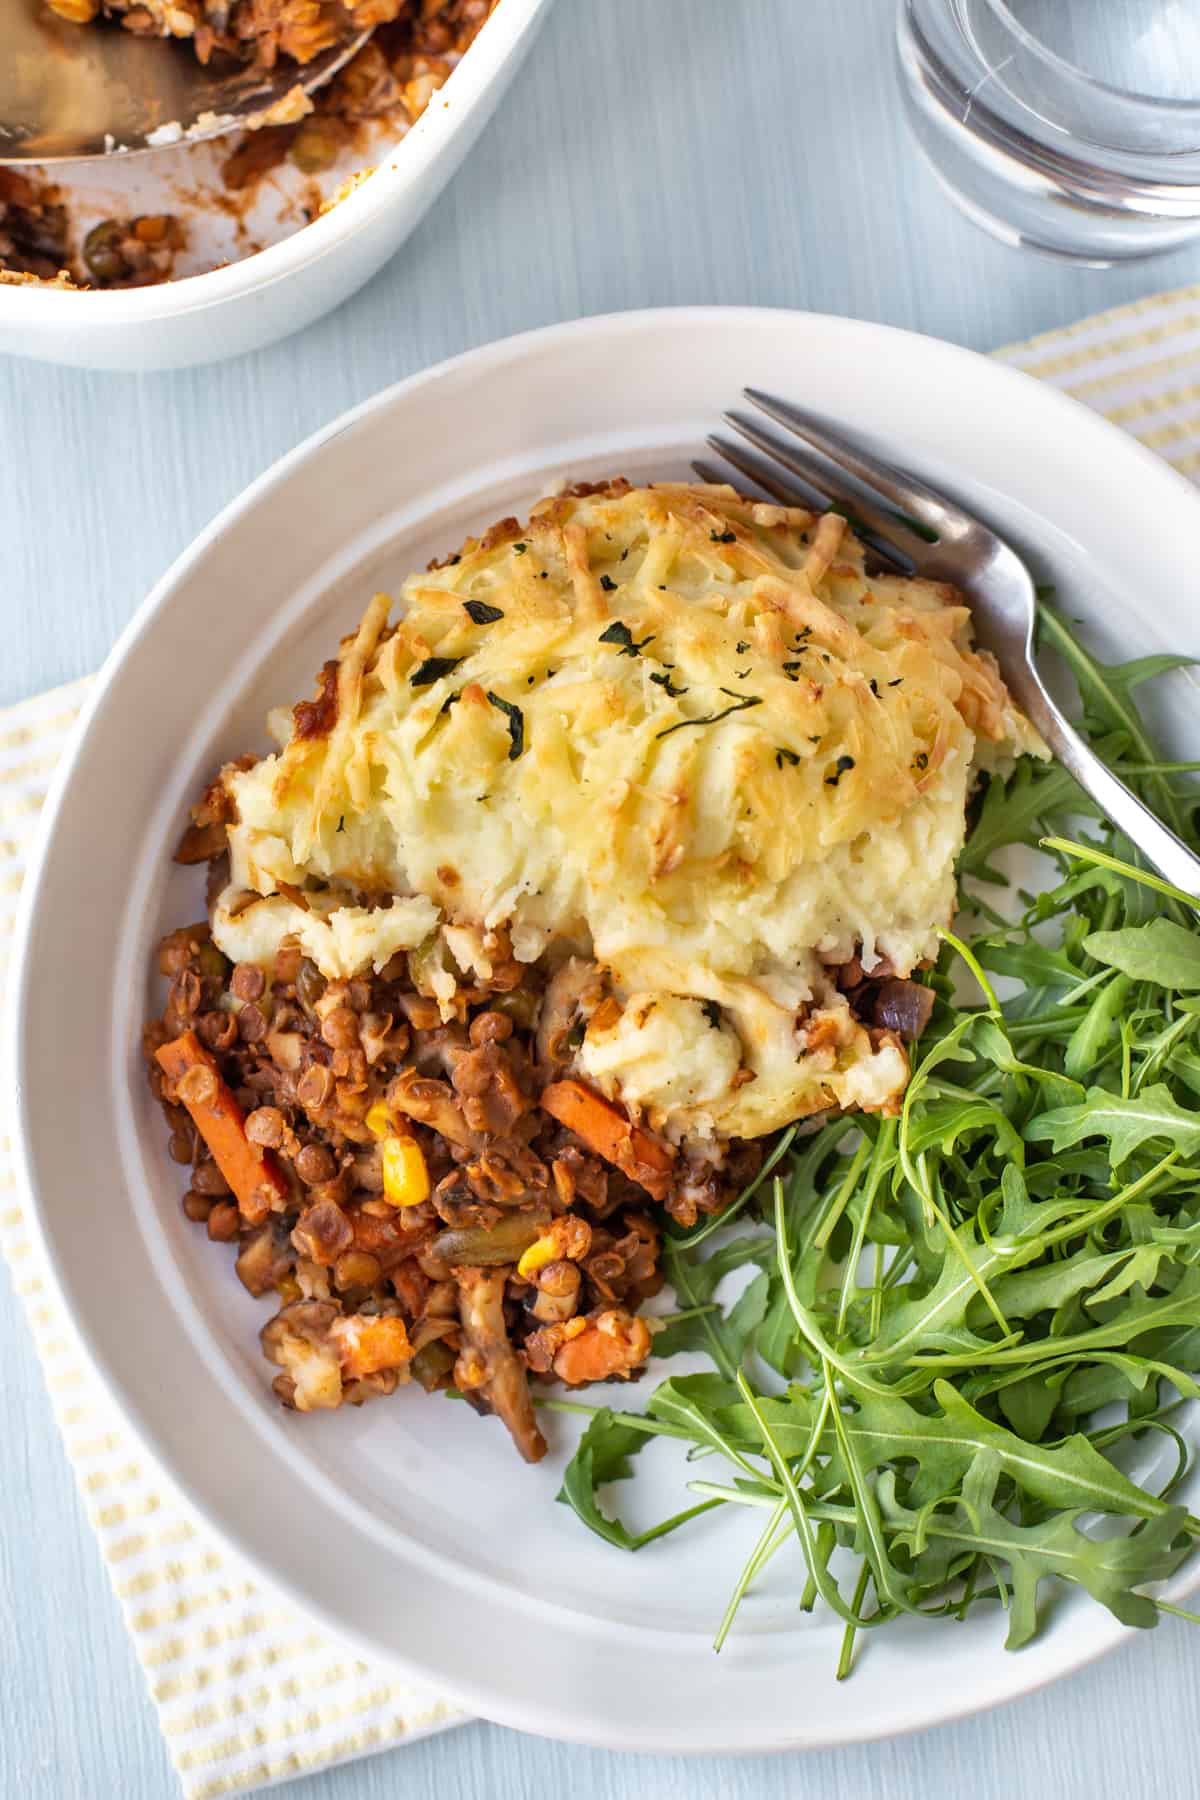 Aerial shot of a portion of shepherd's pie on a plate with fresh rocket.